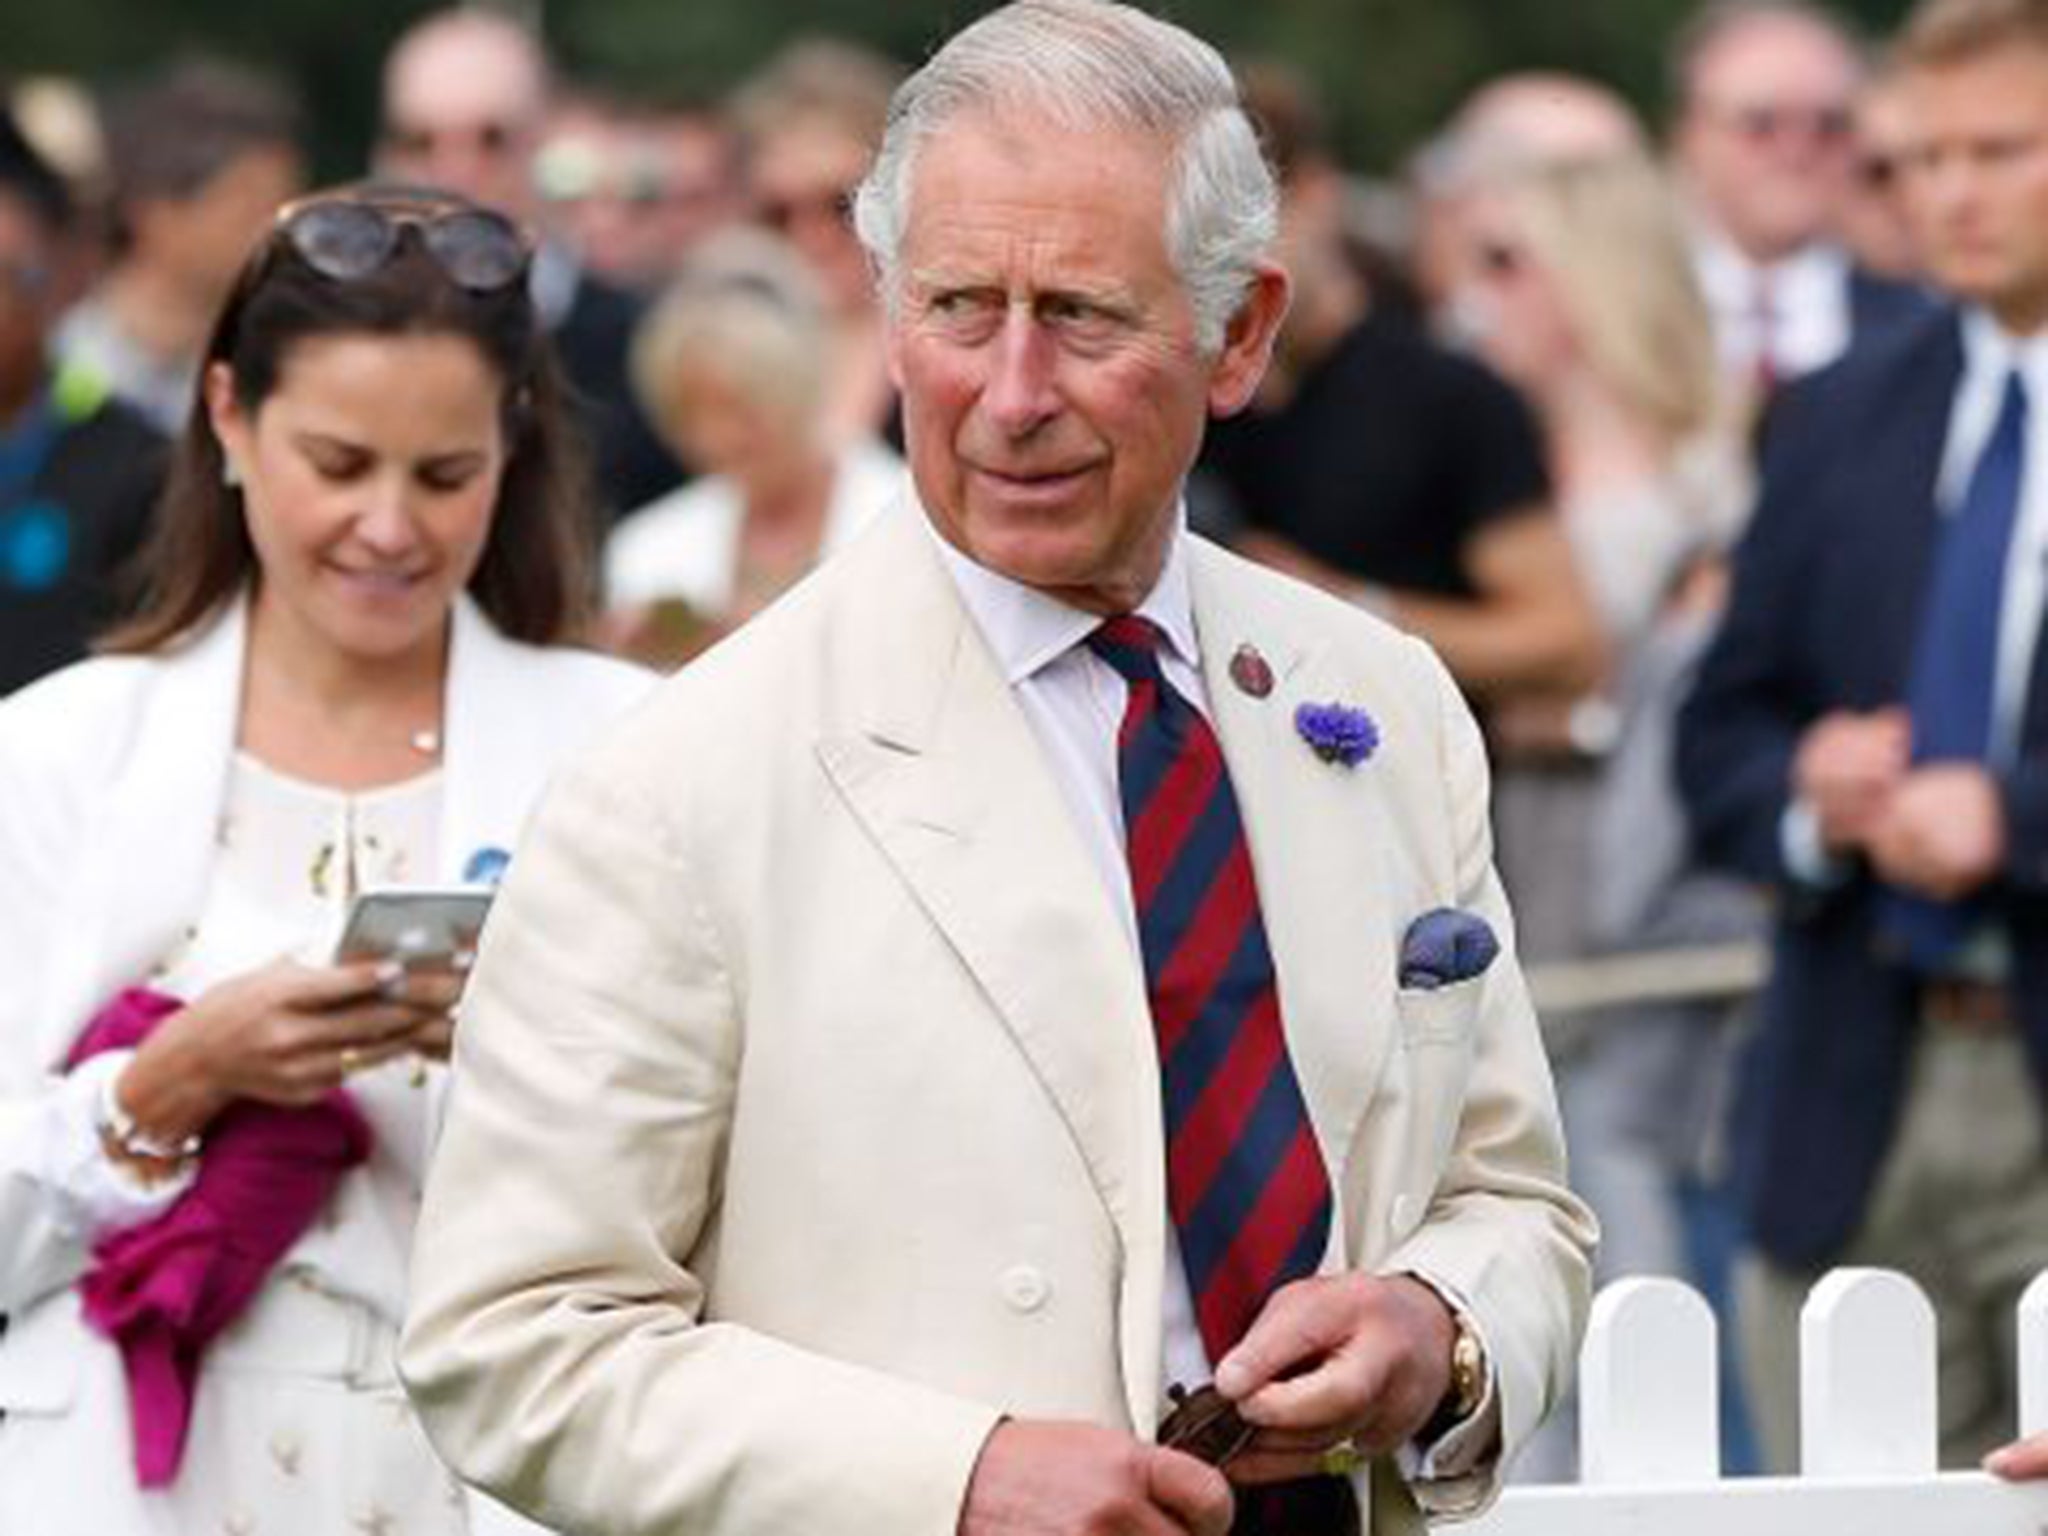 Prince Charles pictured at Guards Polo Club last weekend